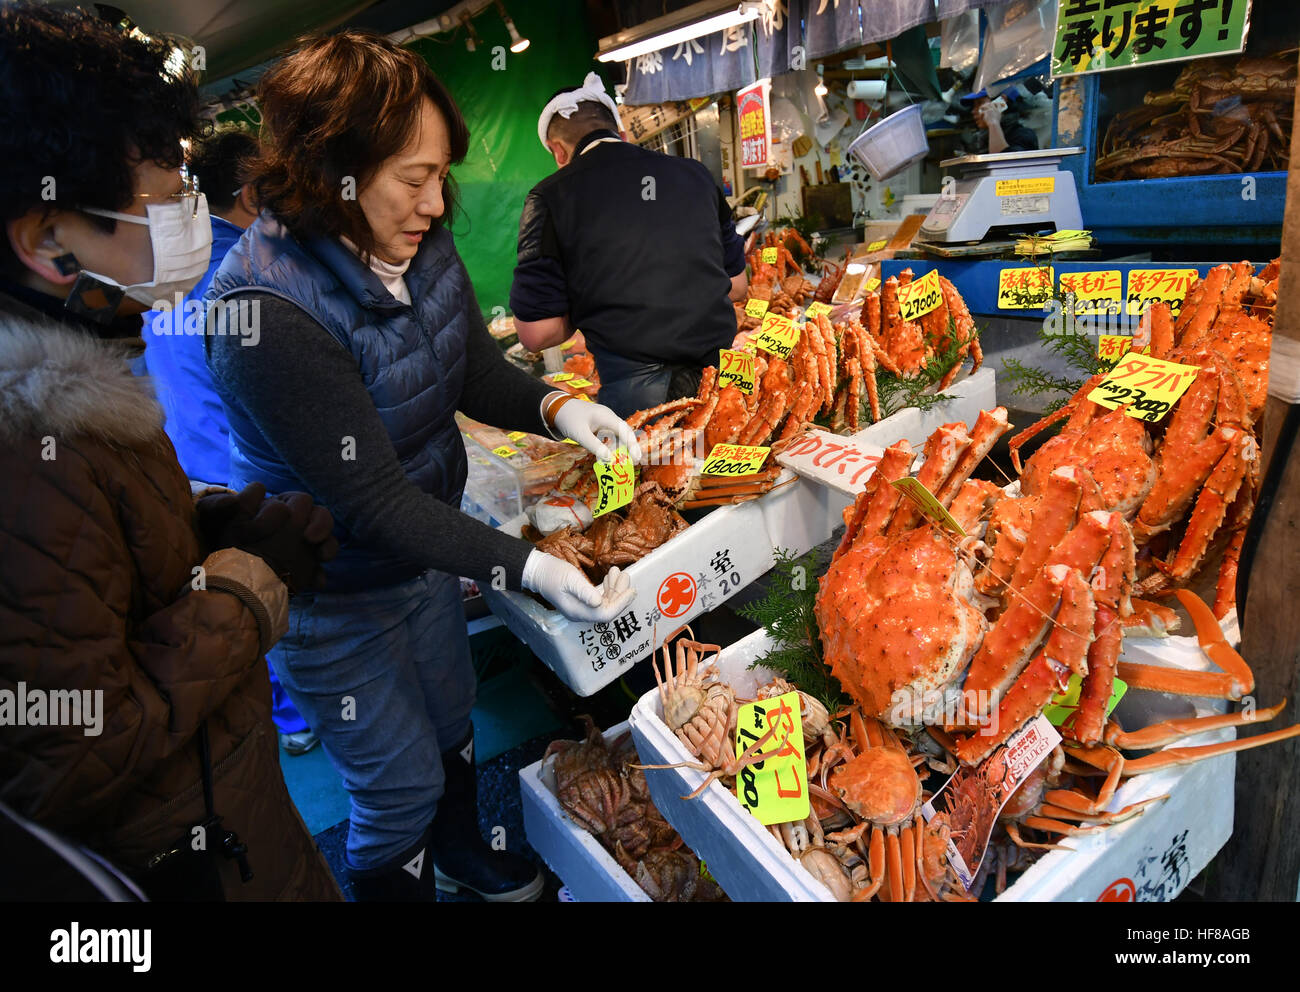 Tokyo, Japan. 28th Dec, 2016. A flock of bargain-hunters and some foreign tourists throngs the narrow maze of alleys lined with hundreds of small shops and stalls selling fresh fish and marine products outside of Tokyo's main fish market in Tsukiji on Thursday, December 28, 2016, the customary last business day of the year. The planned move of the nation's largest wholesale market to the neighboring Toyosu district still hangs in limbo over soil pollution fears and bickering between those for and against the change. © Natsuki Sakai/AFLO/Alamy Live News Stock Photo